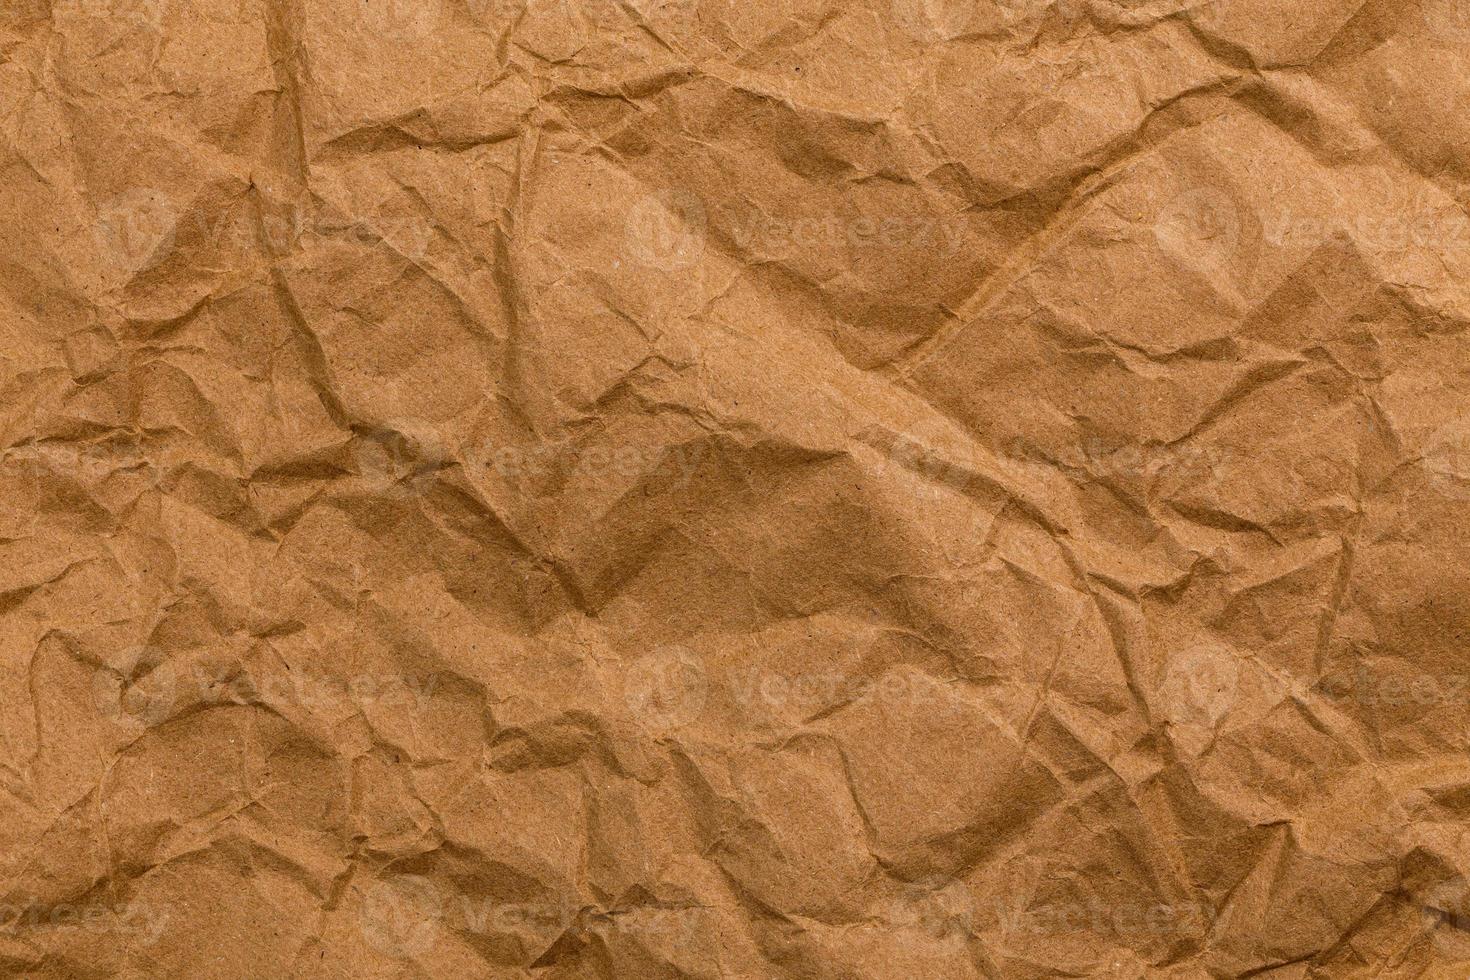 Ragged crumpled brown kraft paper texture and full frame background photo